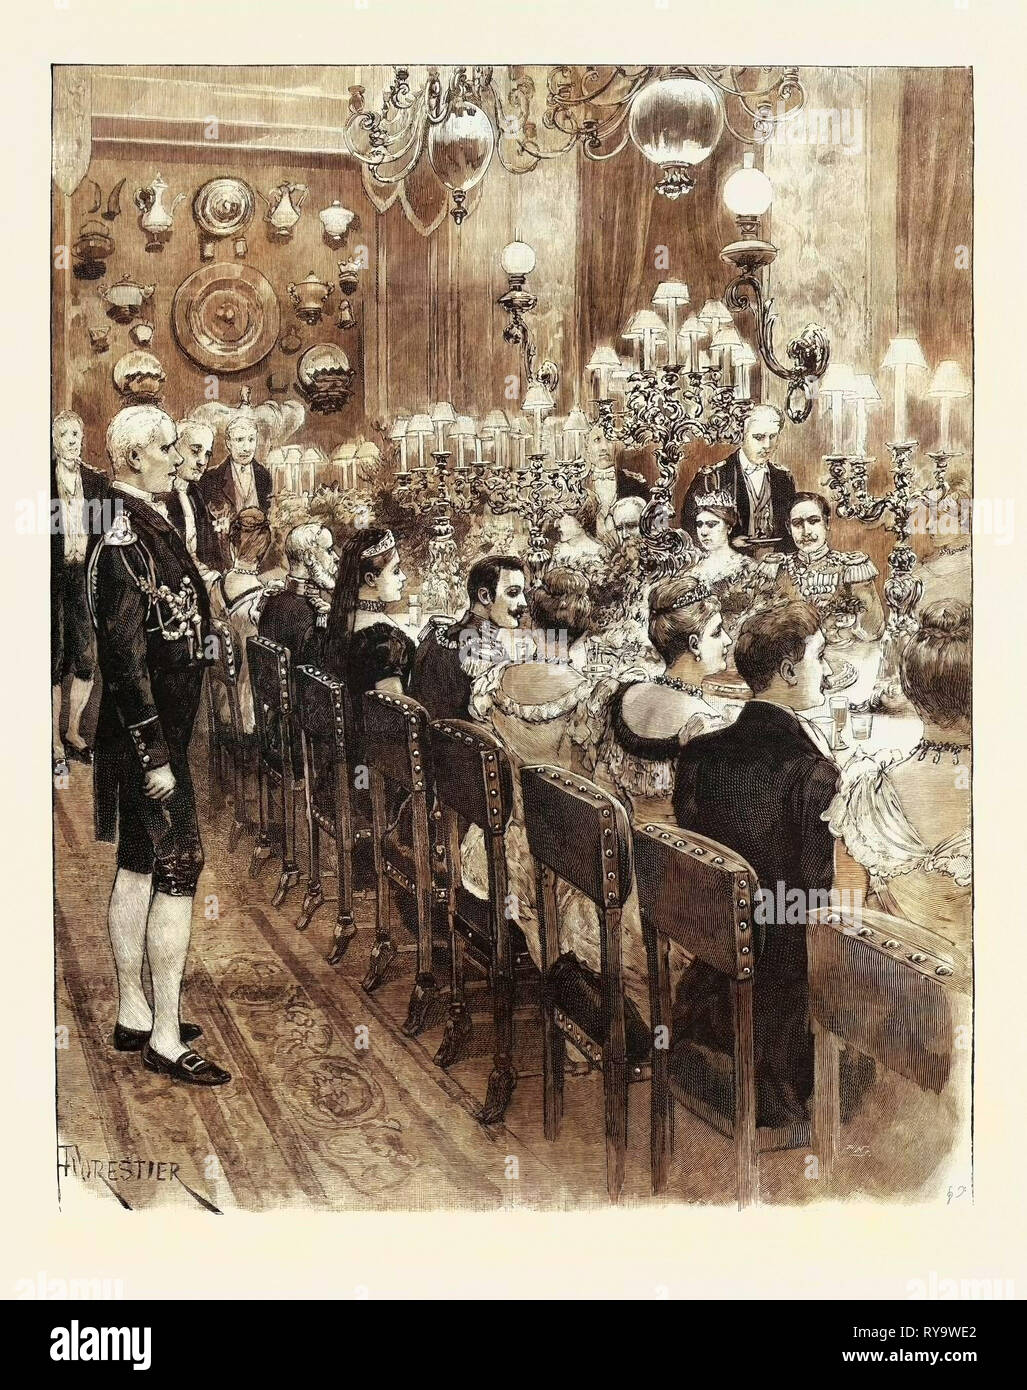 The Royal Marriage at Berlin, Germany: Banquet at the Royal Palace, Prince Frederick Charles of Hesse and Princess Margaret of Prussia, 1893, 1893 Engraving Stock Photo